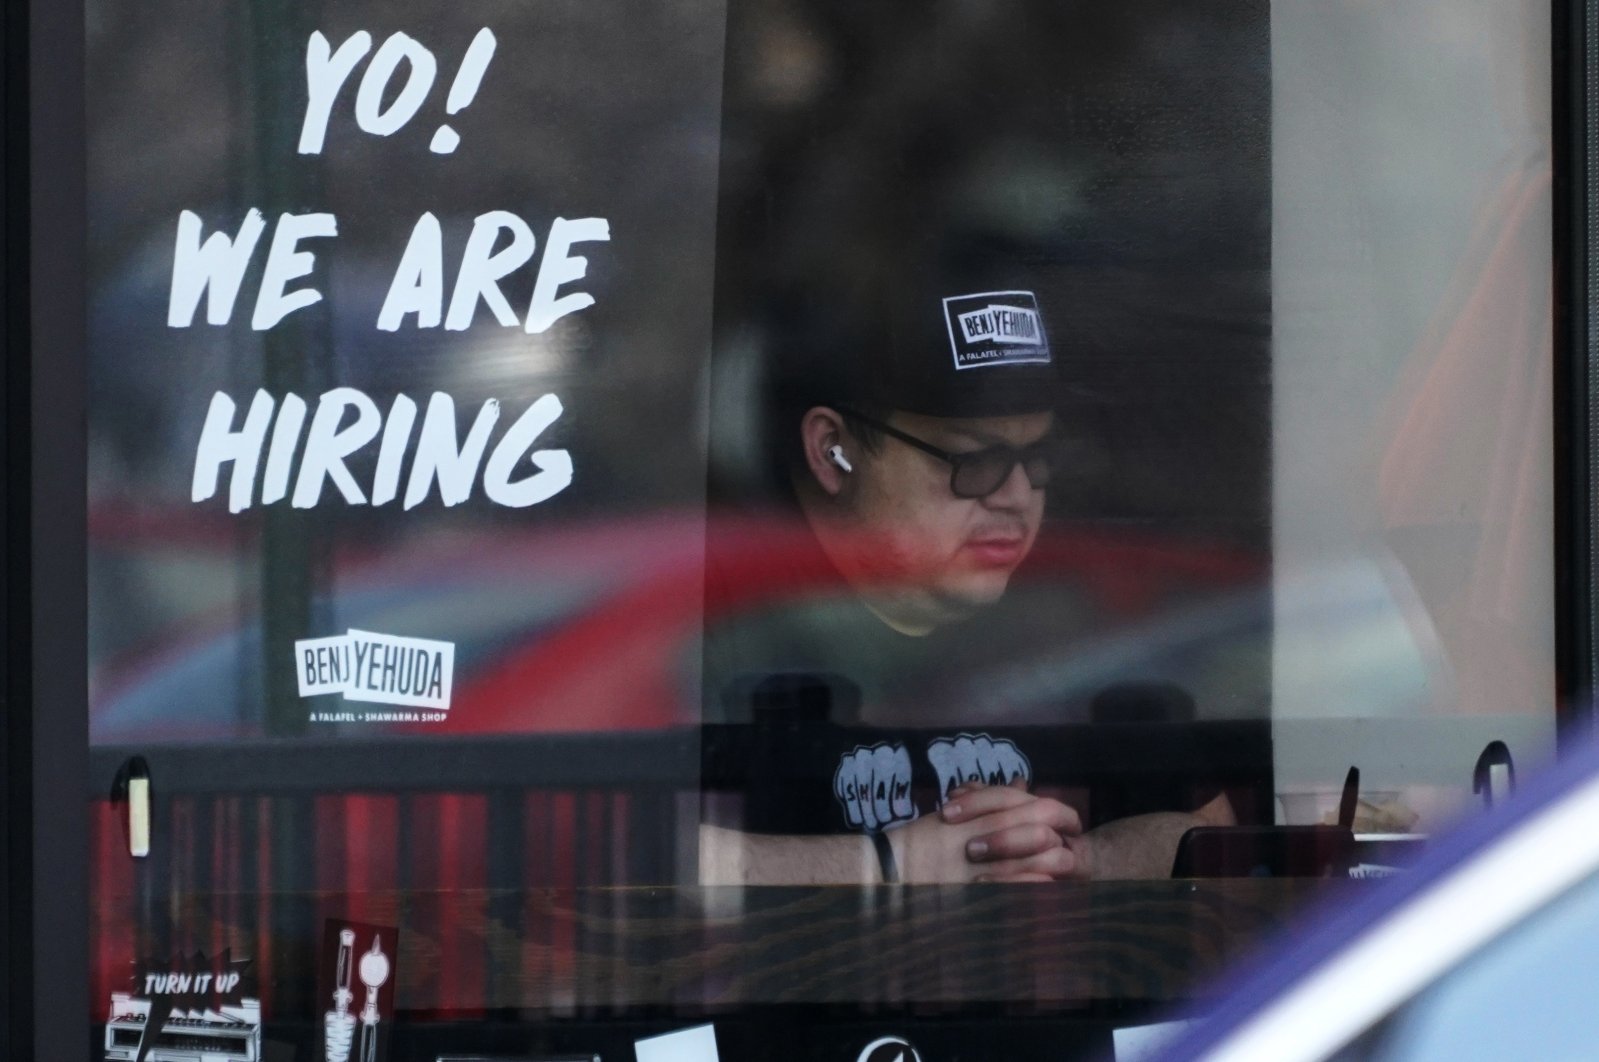 A hiring sign is displayed at a restaurant in Schaumburg, Illinois, U.S., April 1, 2022. (AP Photo)